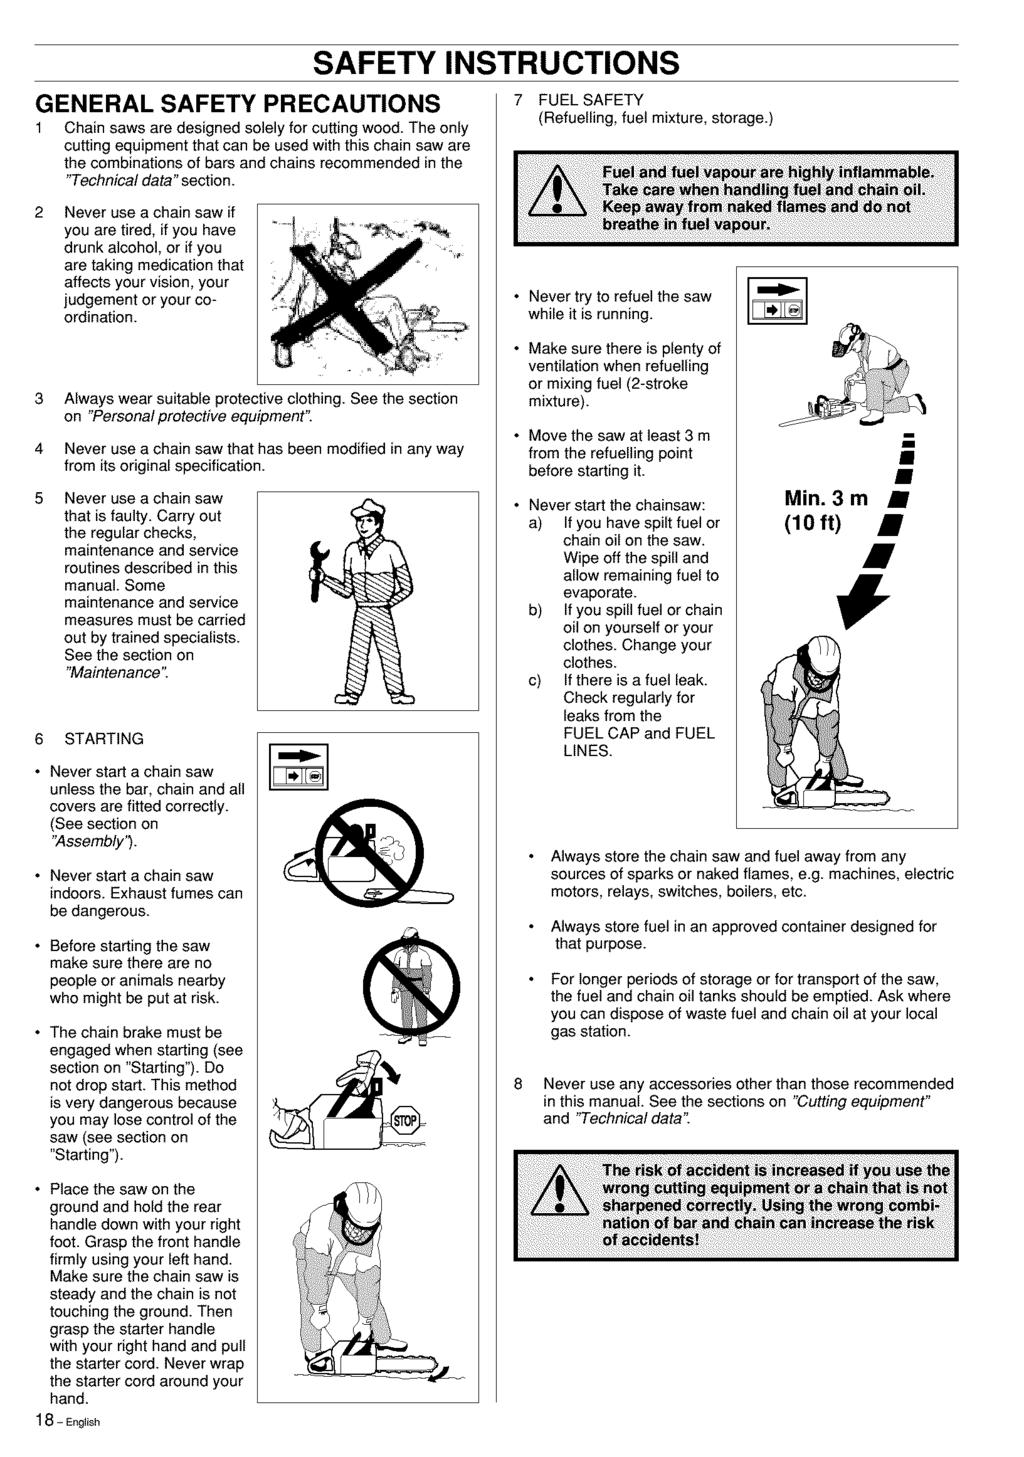 SAFETY GENERAL SAFETY PRECAUTIONS 1 Chain saws are designed solely for cutting wood.